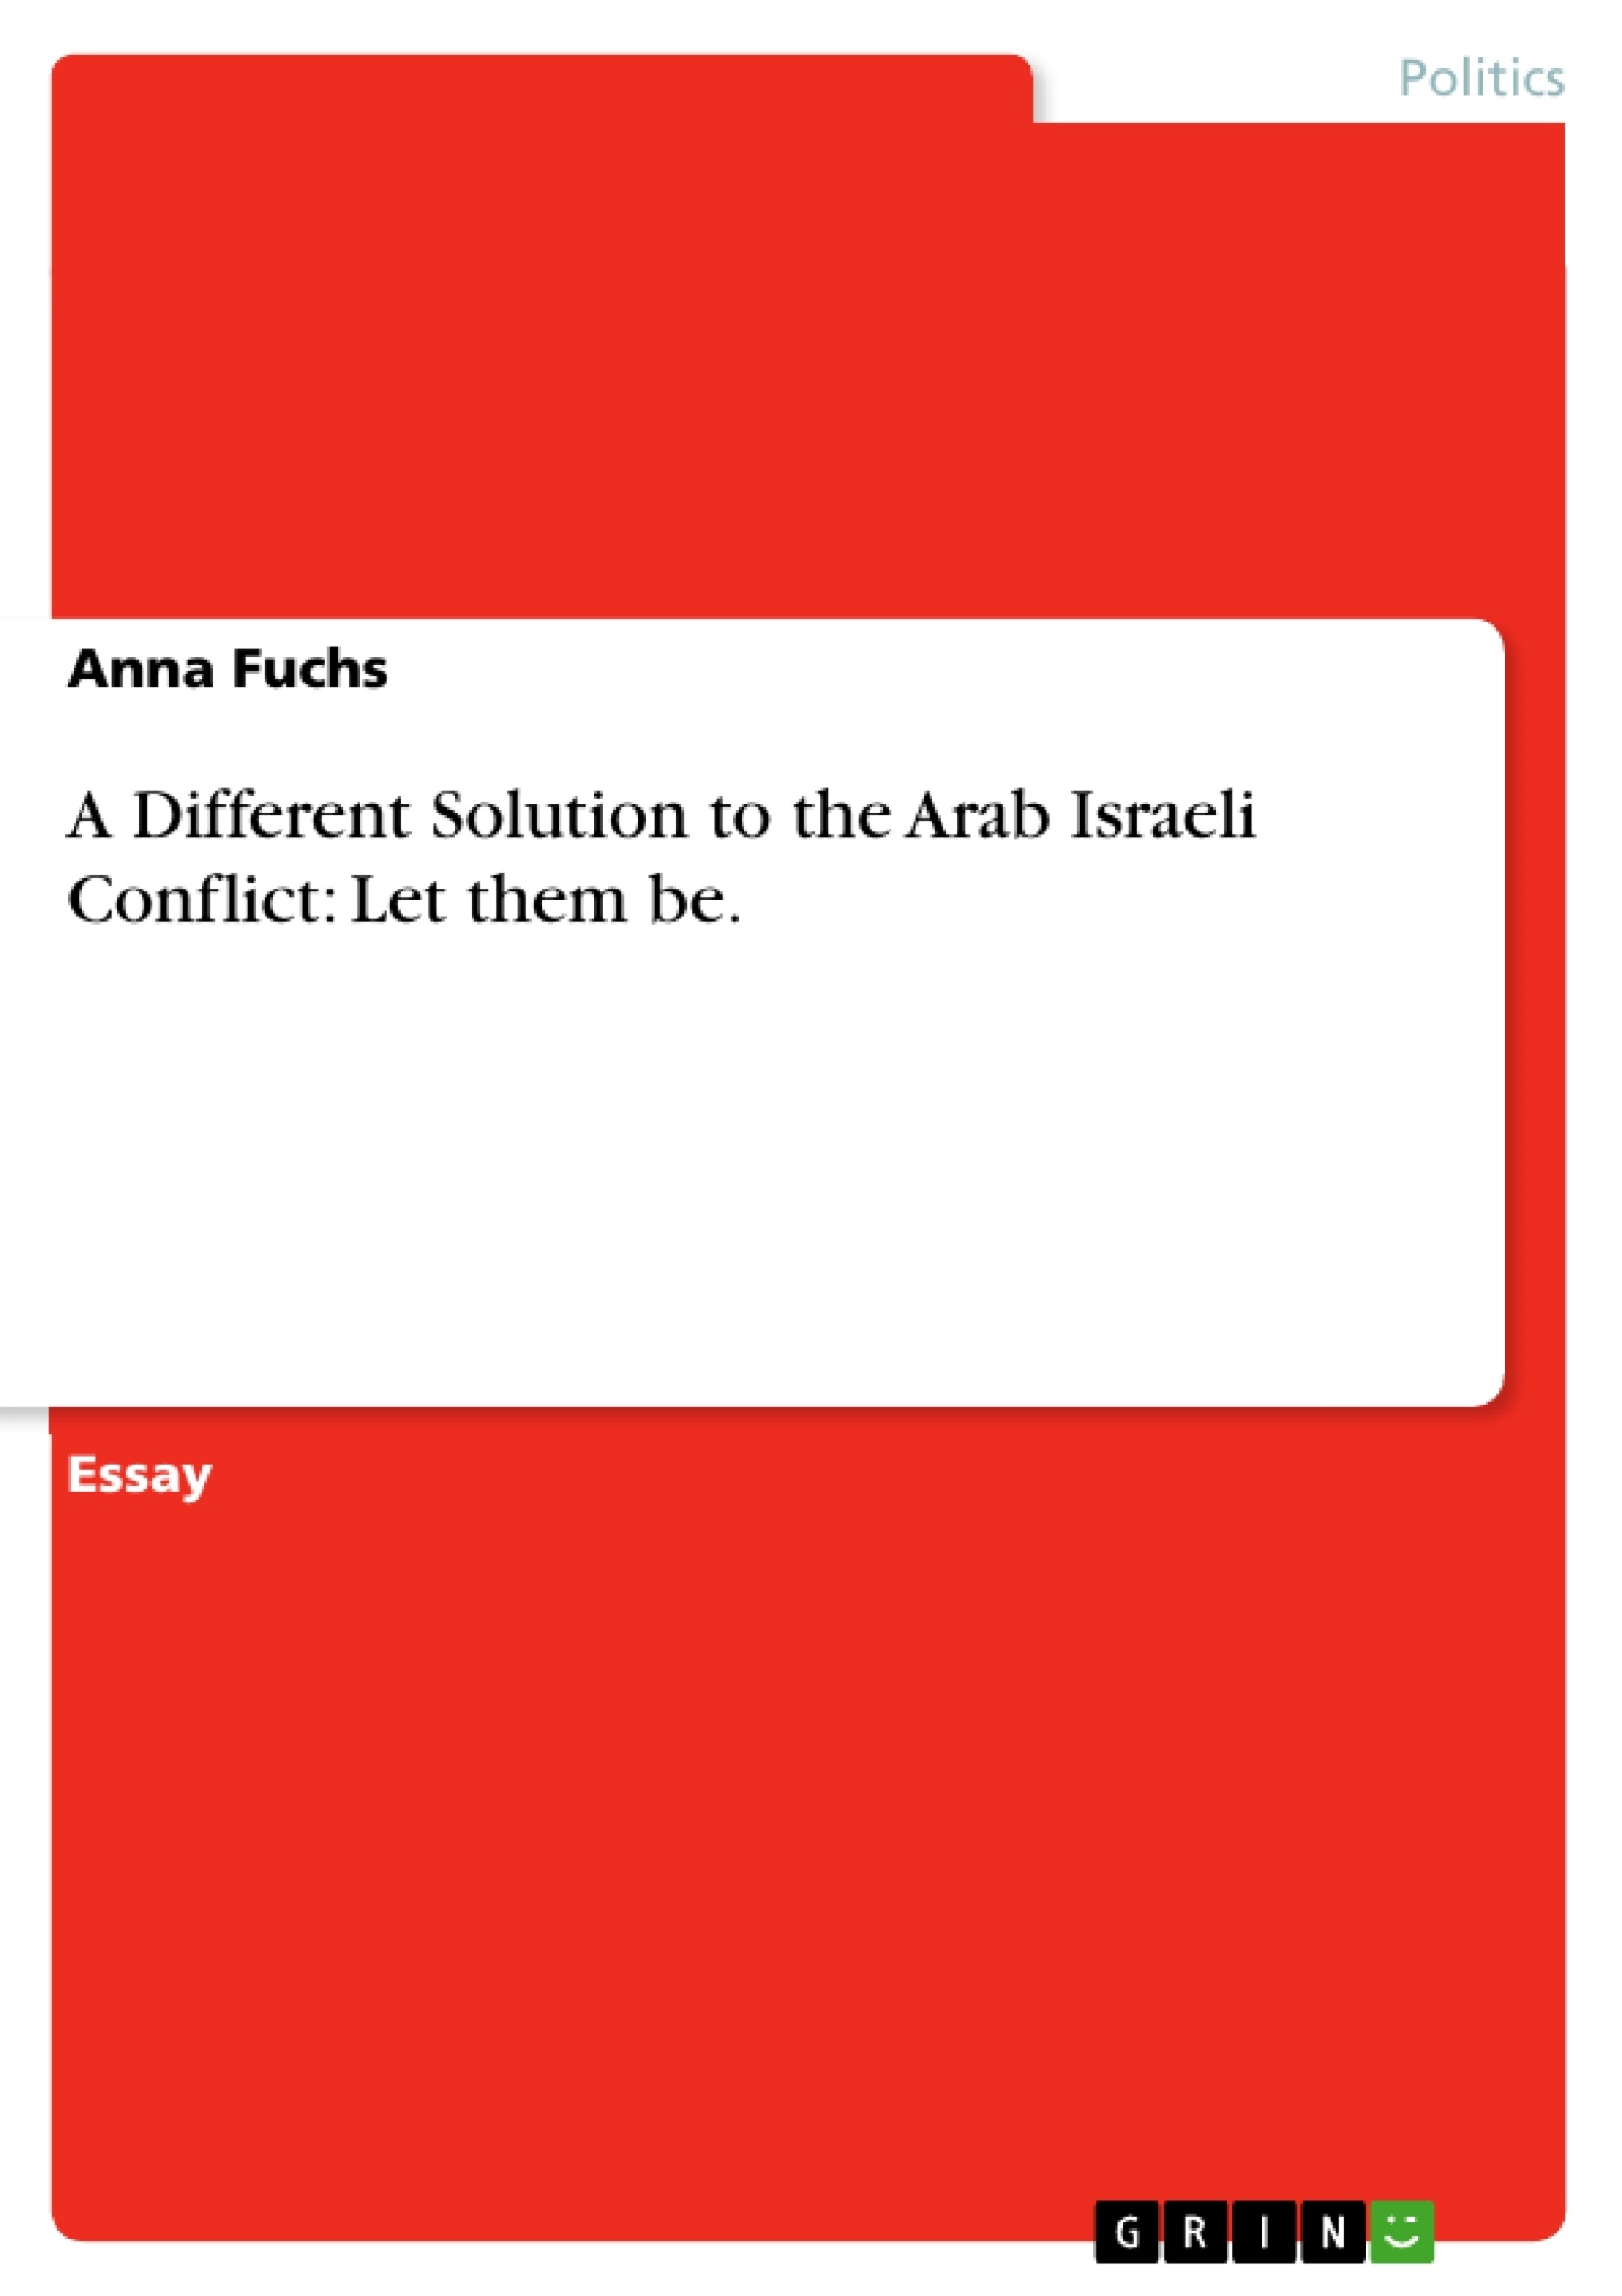 Title: A Different Solution to the Arab Israeli Conflict: Let them be.